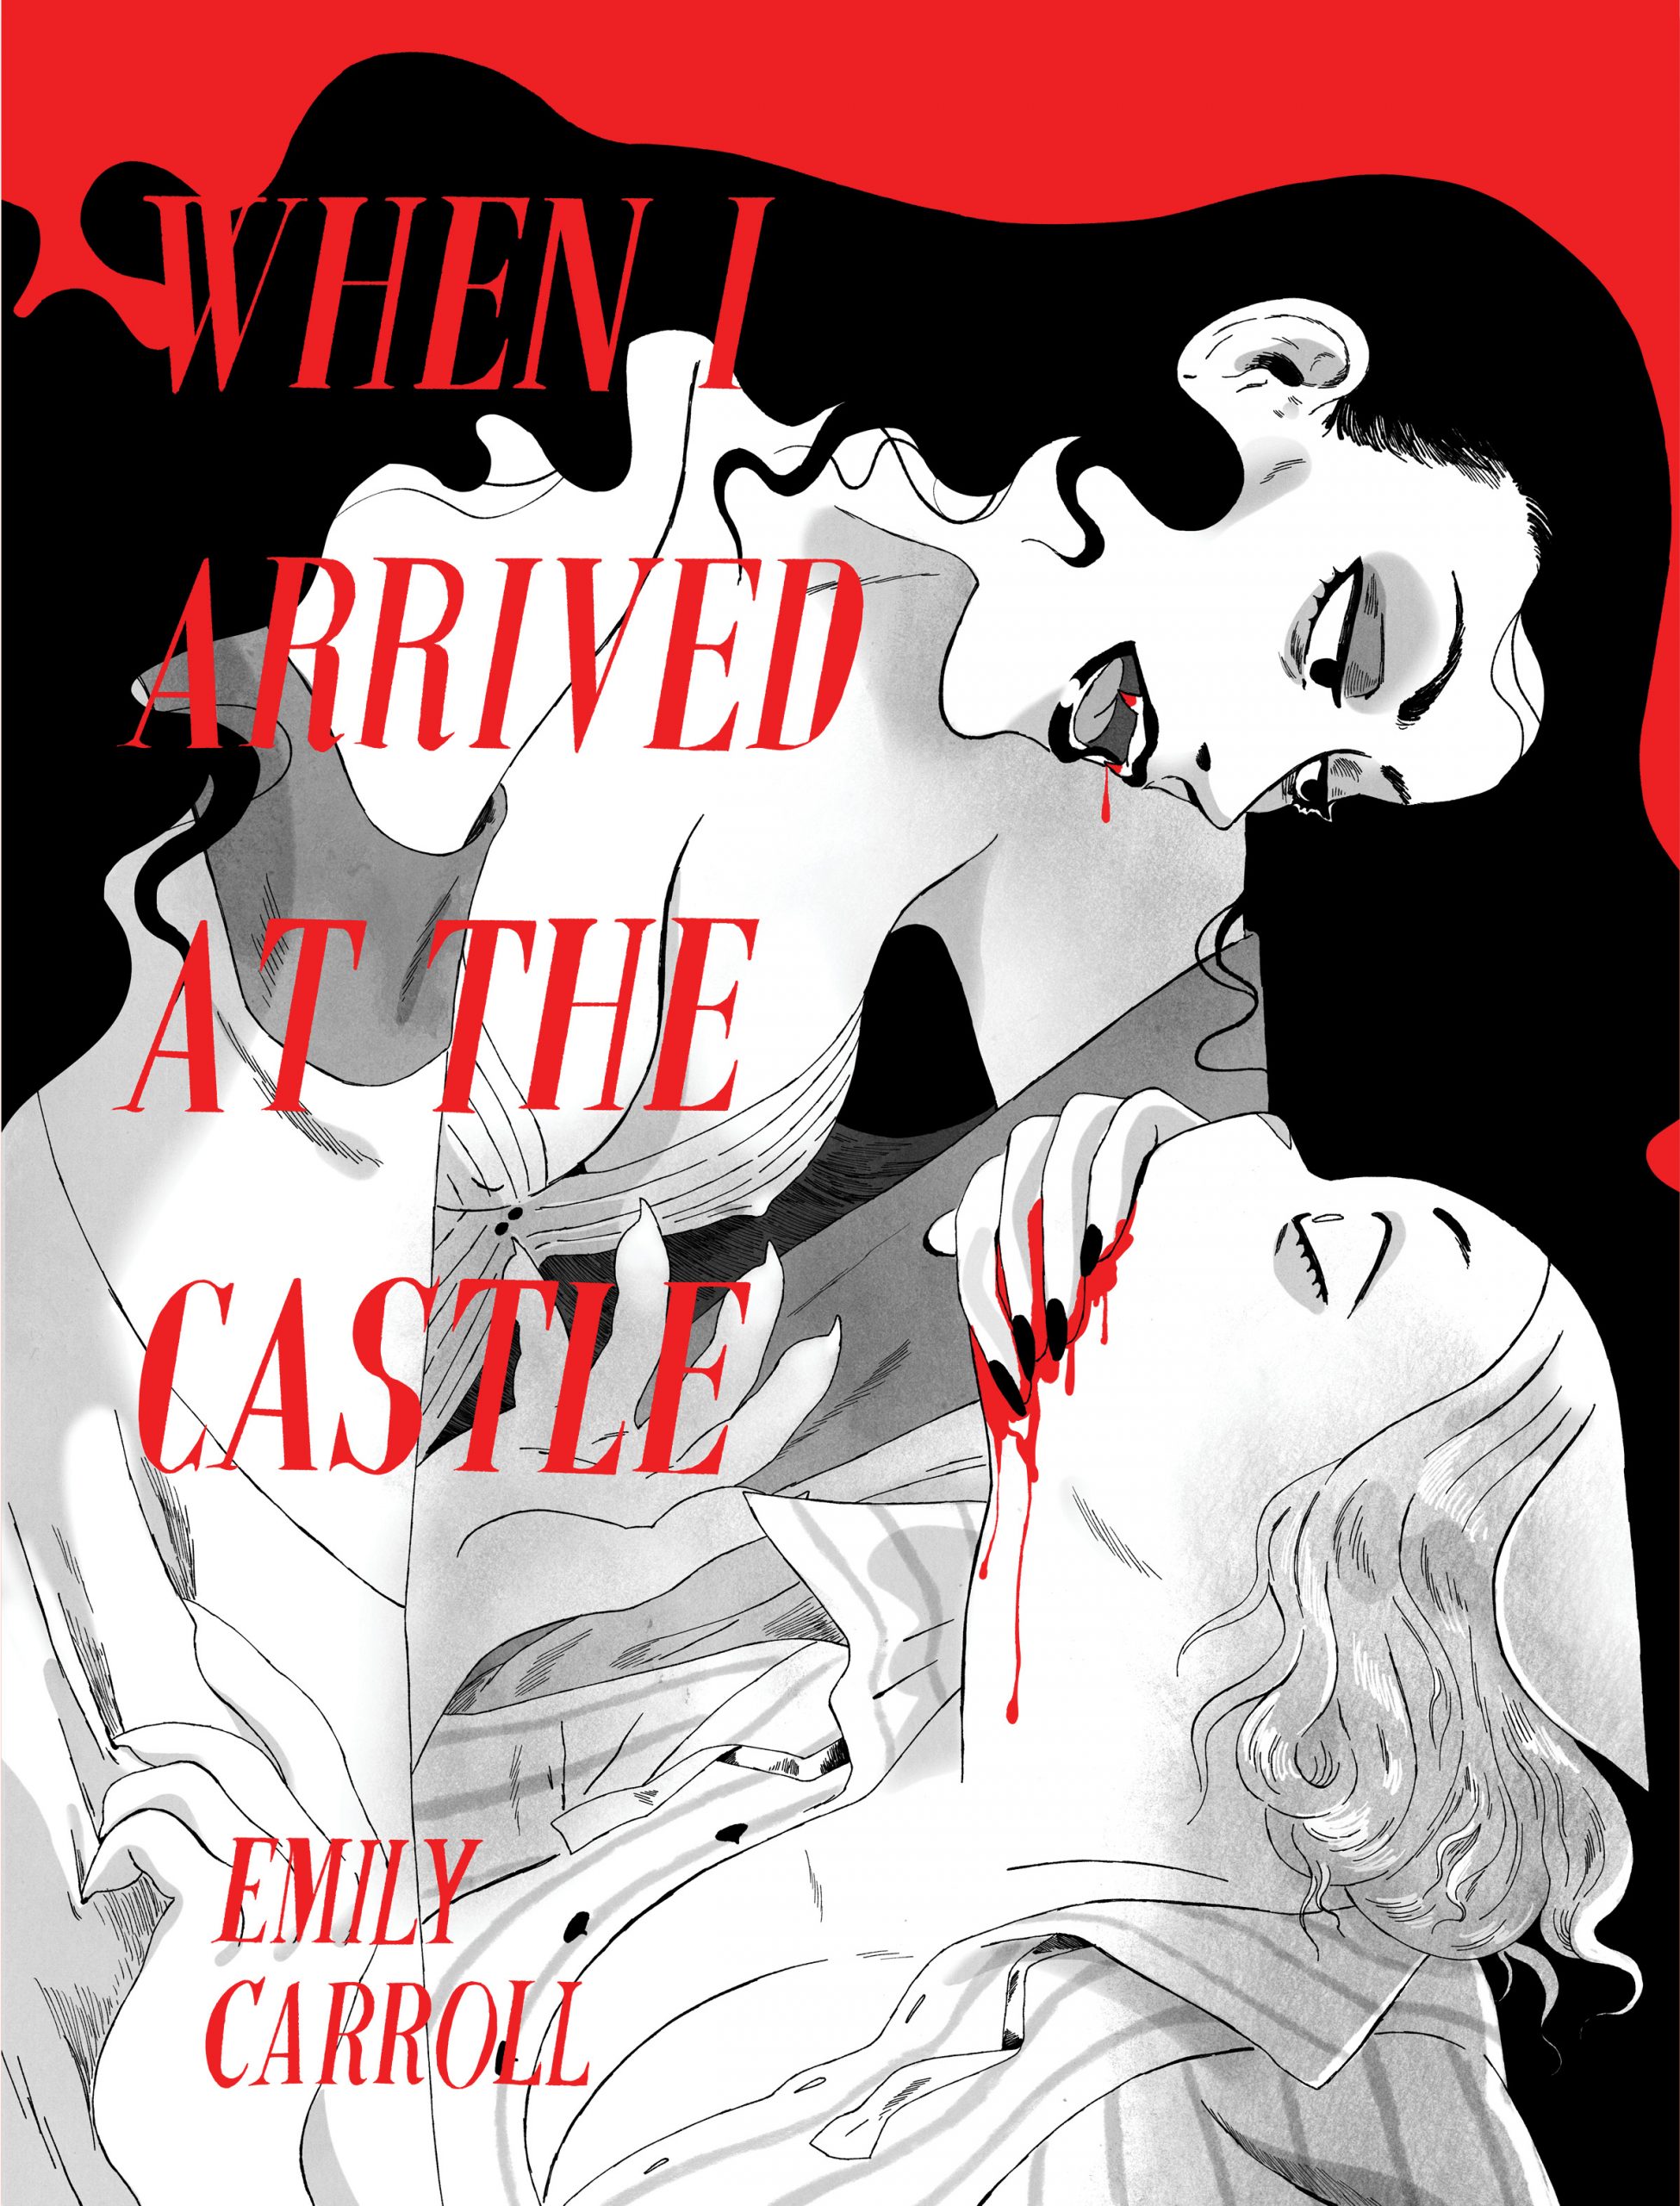 Cover of When I Arrived At the Castle by Emily Carroll